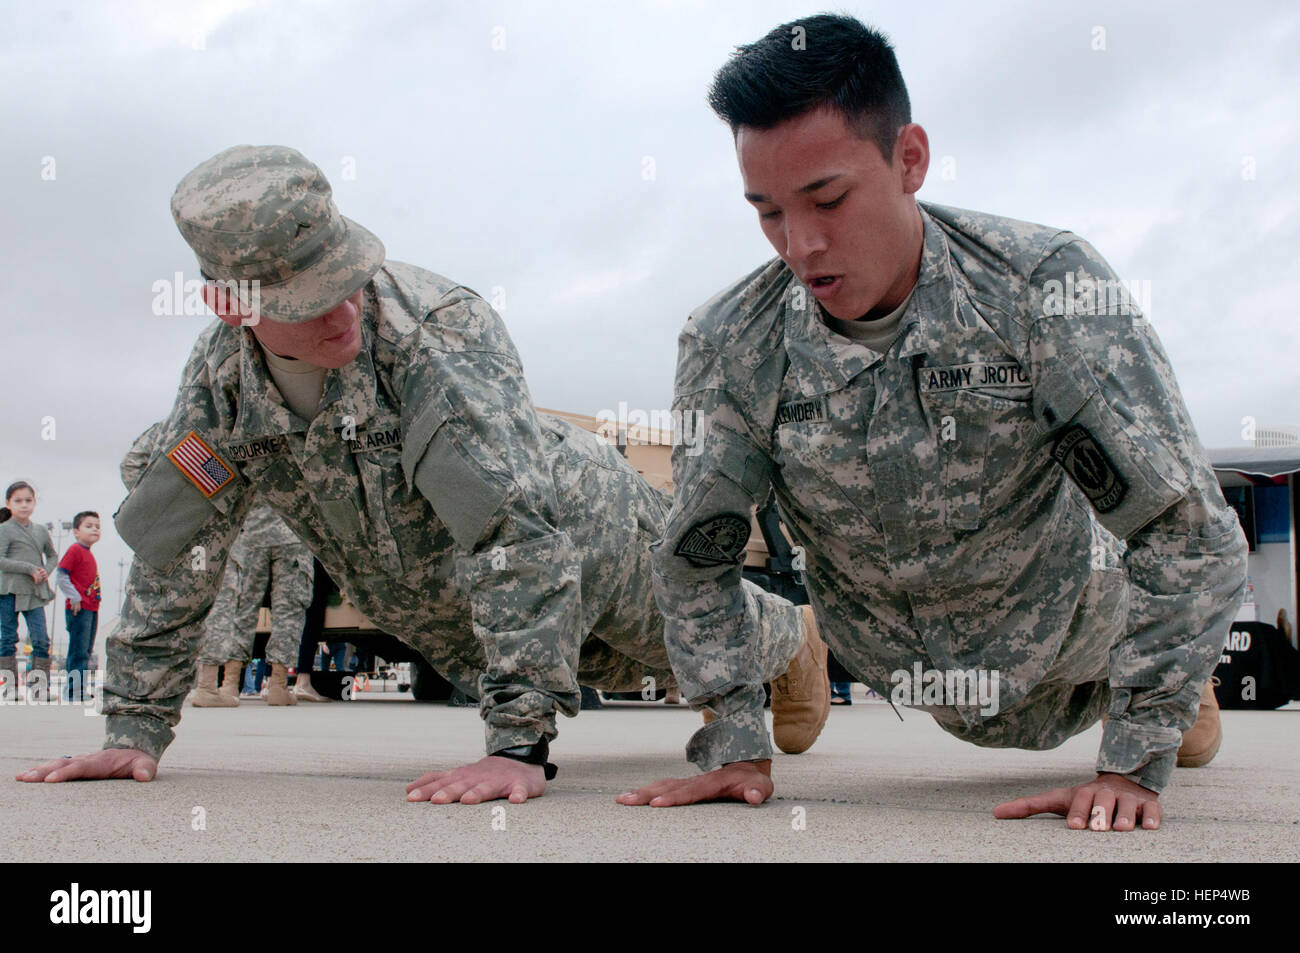 Infantryman Pvt. Javier Orouke encourages Kevin Cabrera, a student at Alexander High School in Laredo, Texas, to complete some pushups at the Texas Army National Guard recruiting display for the Laredo Air Show, Feb. 15. The Washington’s Birthday Celebration Association Stars and Stripes Spectacular Air Show is one of many events for Laredo’s month-long celebration for America’s first president. (Texas Army National Guard photo by Sgt. Michael Vanpool, 36th Infantry Division Public Affairs) Community, military team up for Laredo air show 150215-A-XD022-005 Stock Photo